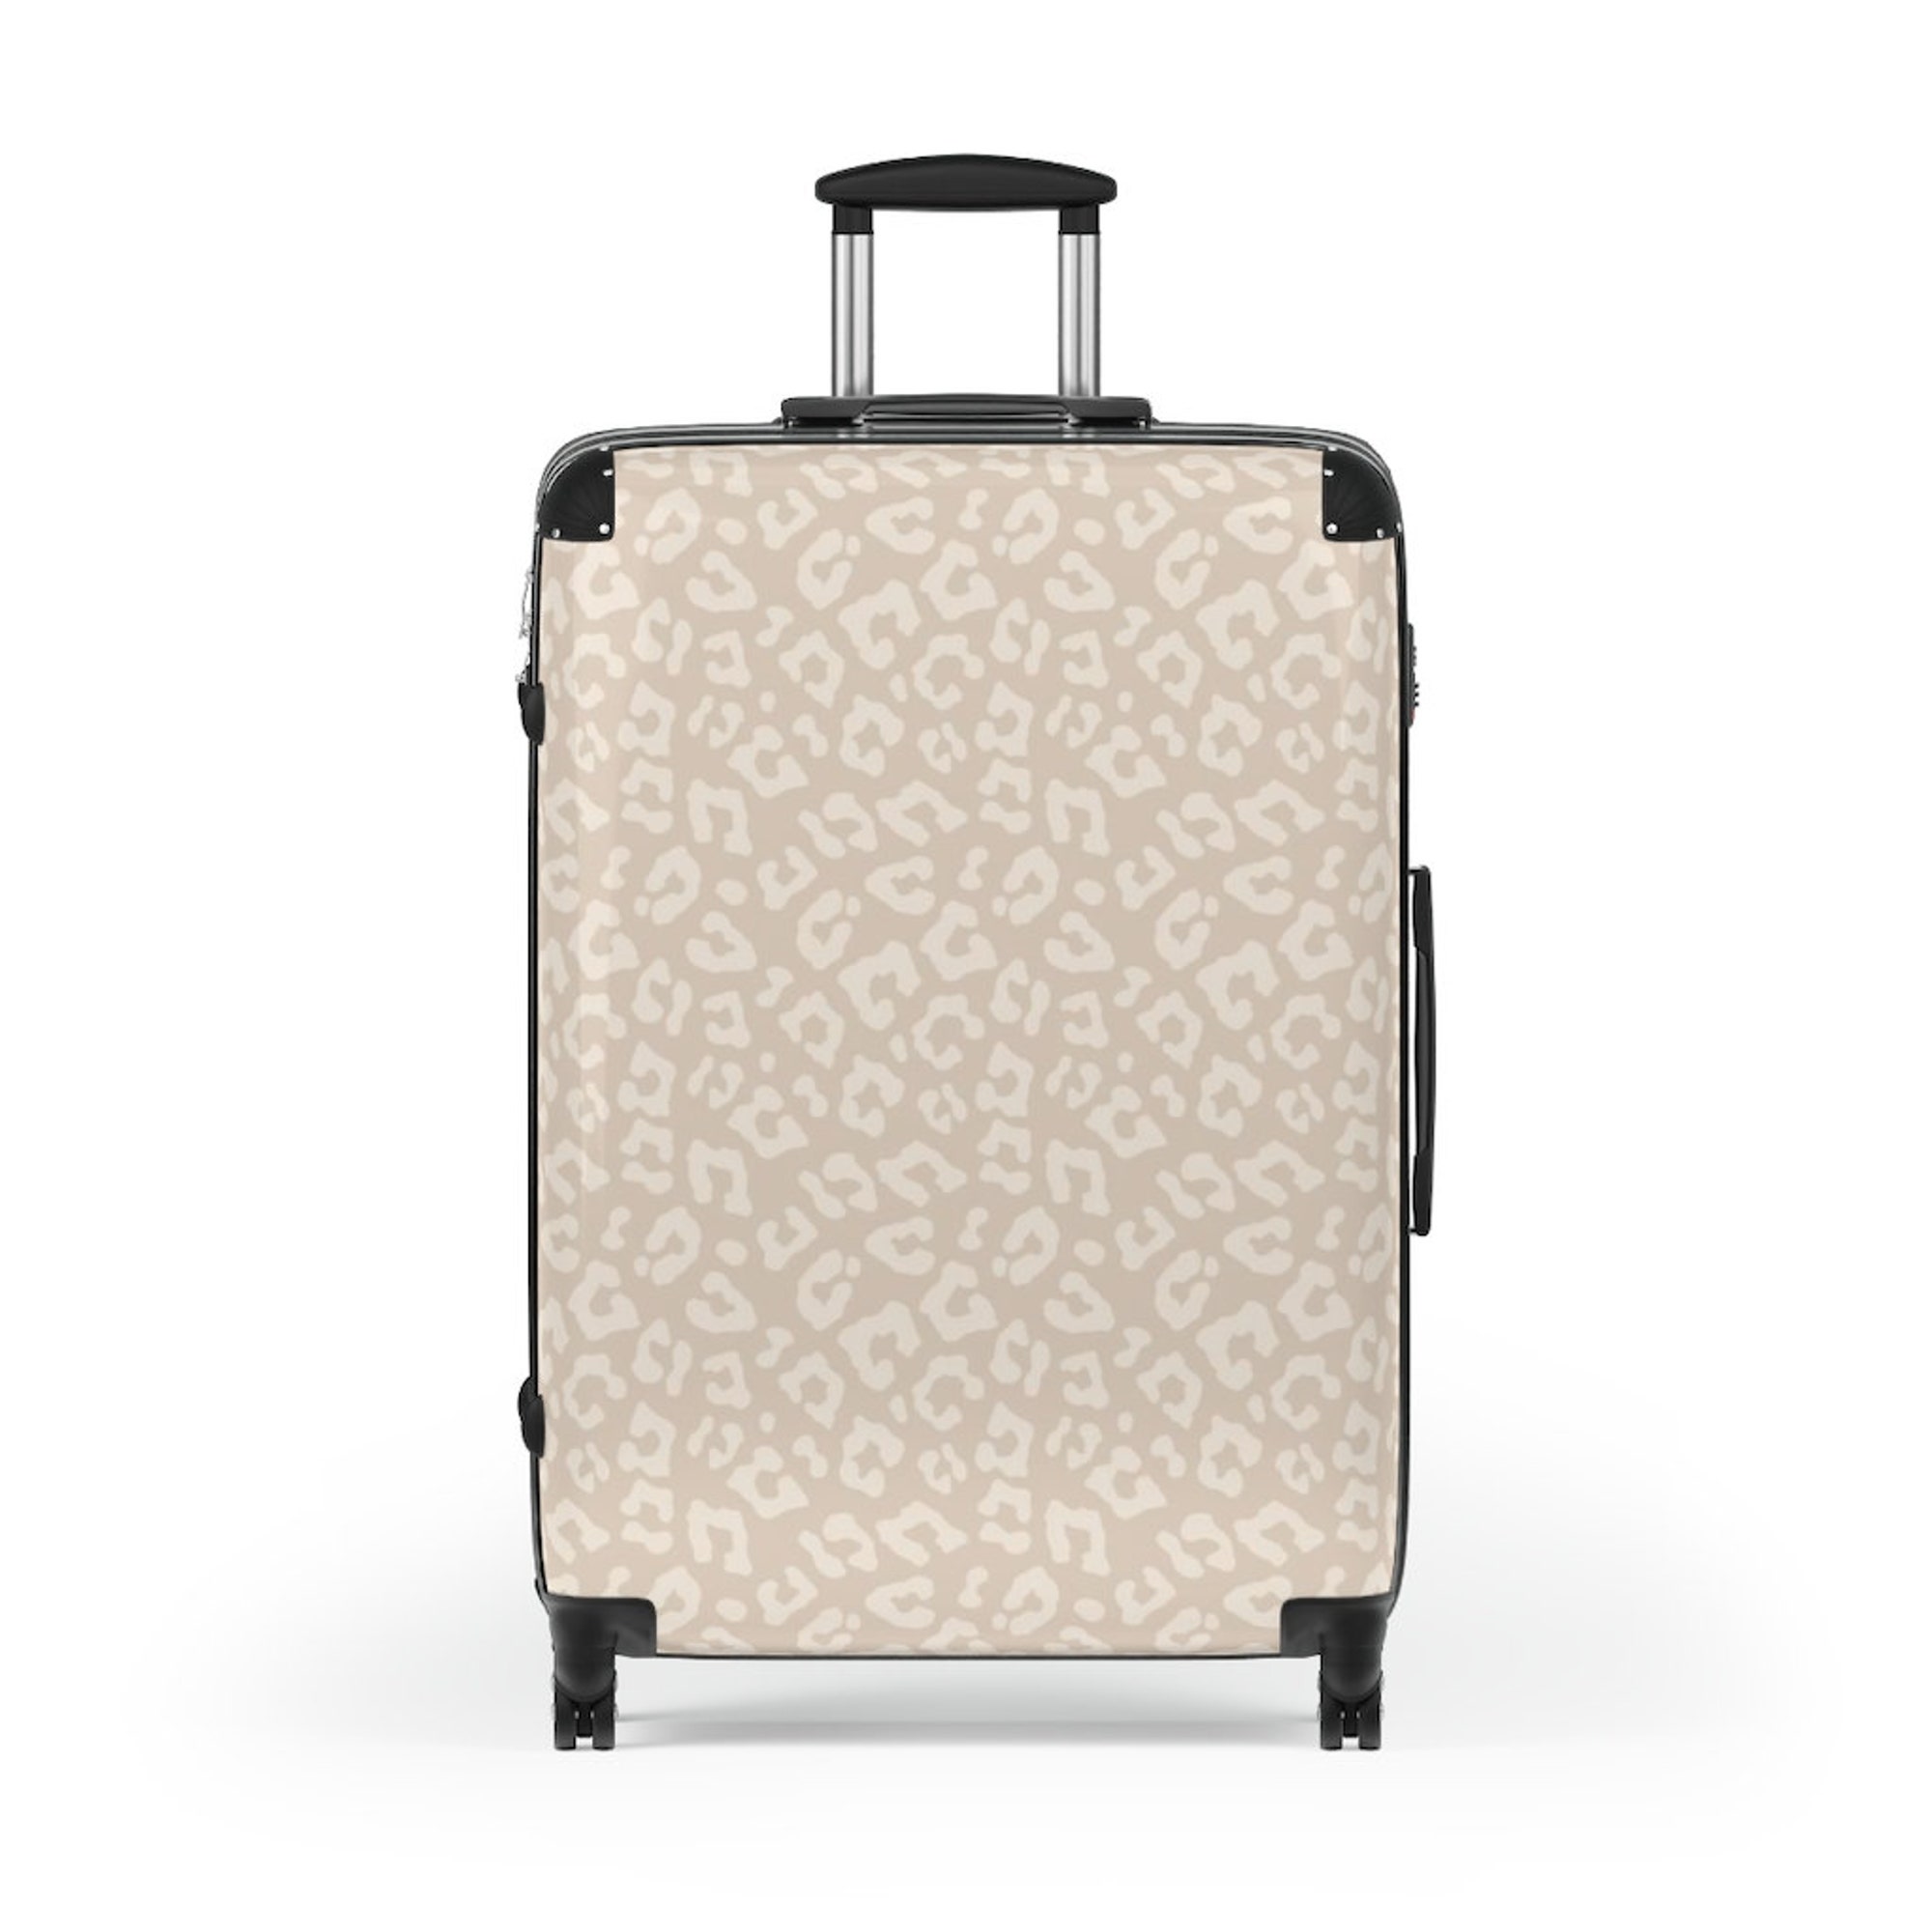 Discover The Suave Leopard Suitcase